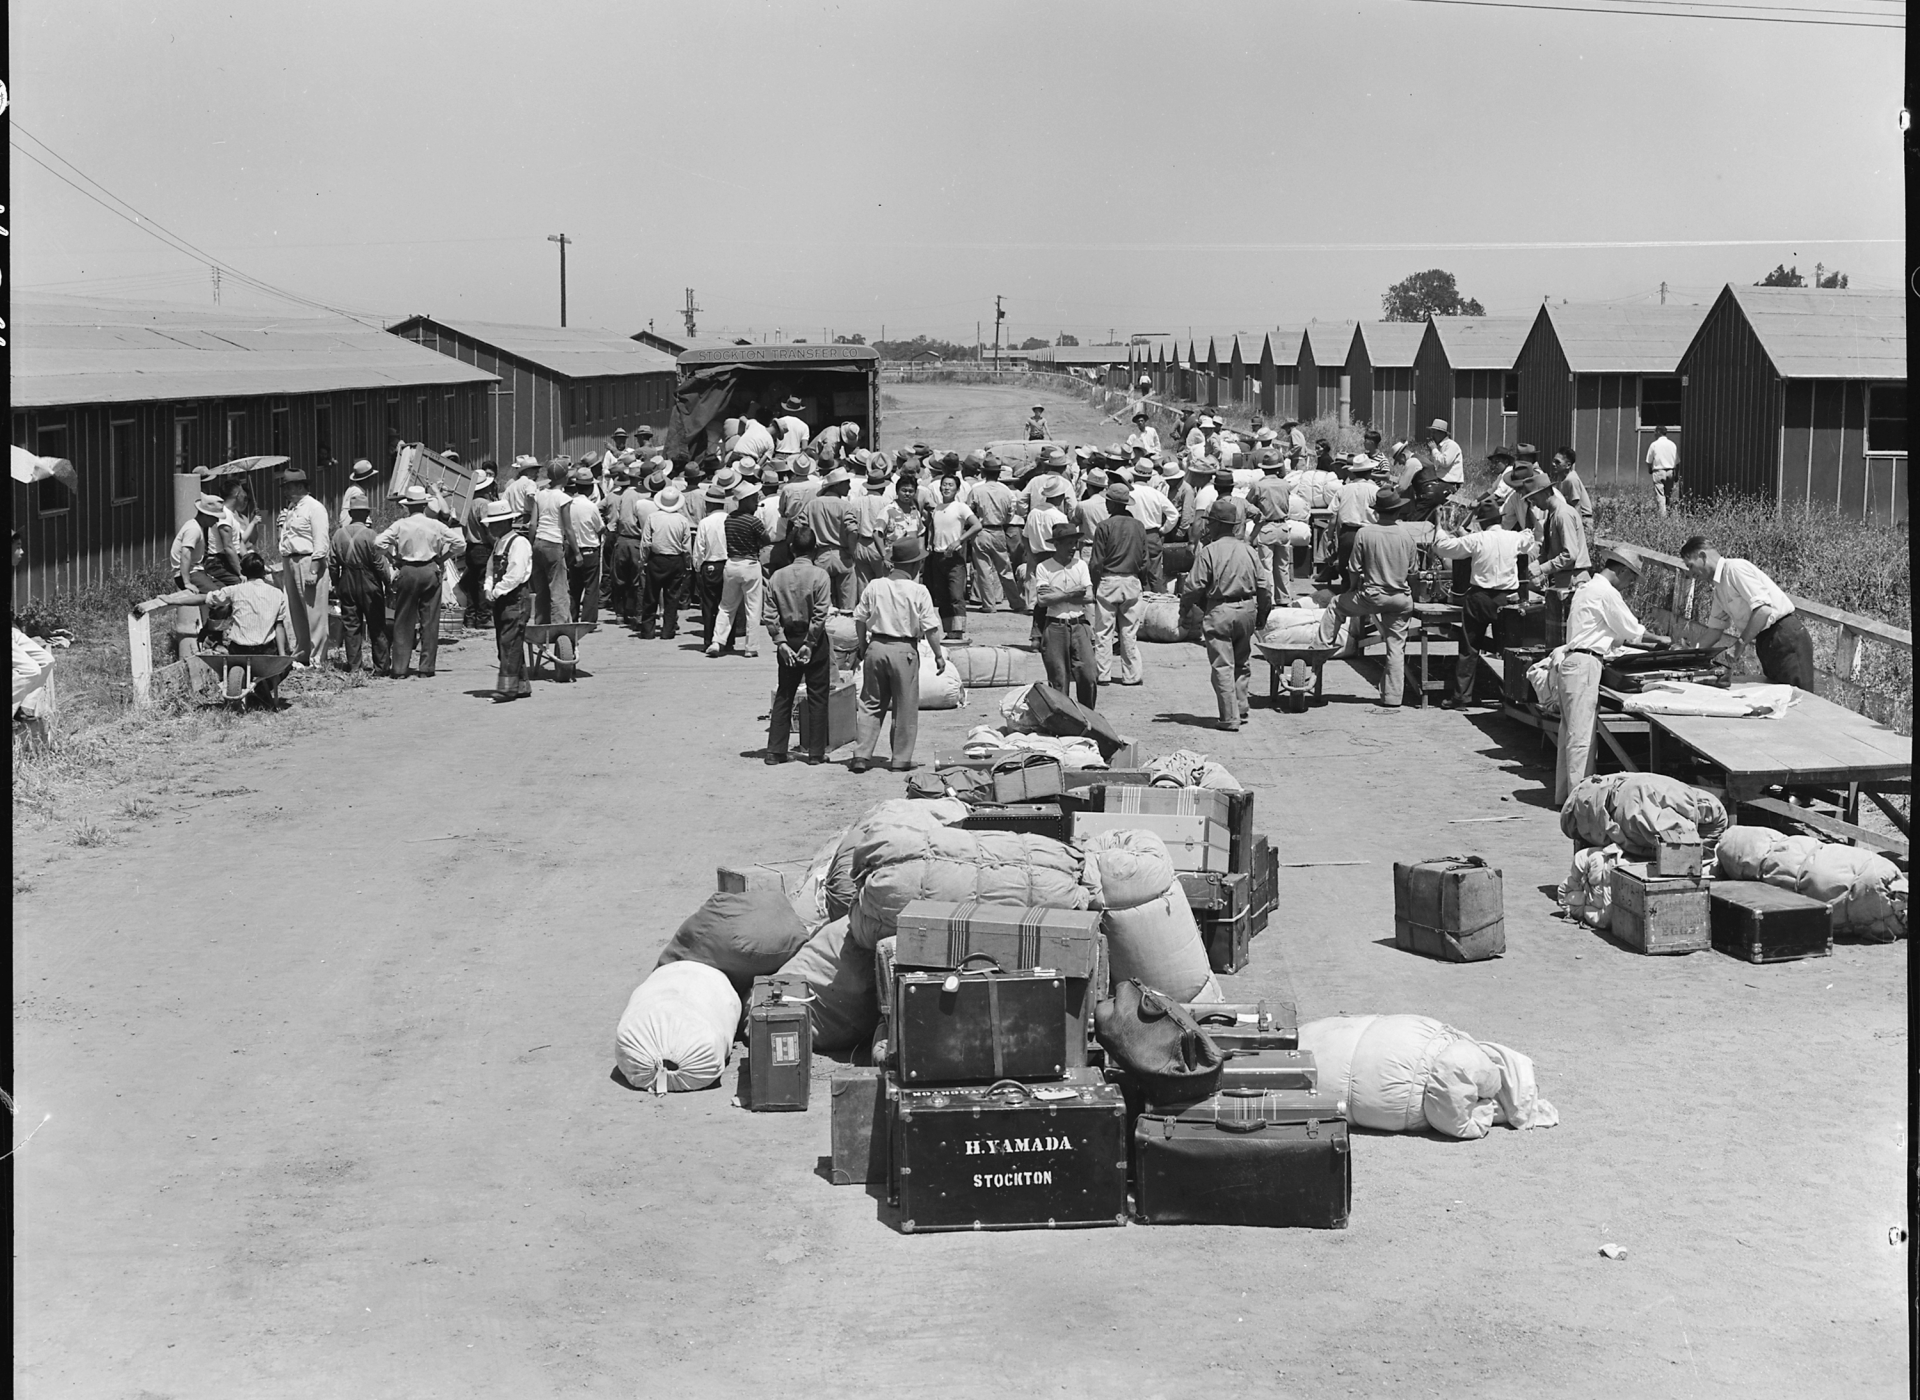 Japanese-Americans are moved into buildings as their belongings lie scattered on the pavement behind them.